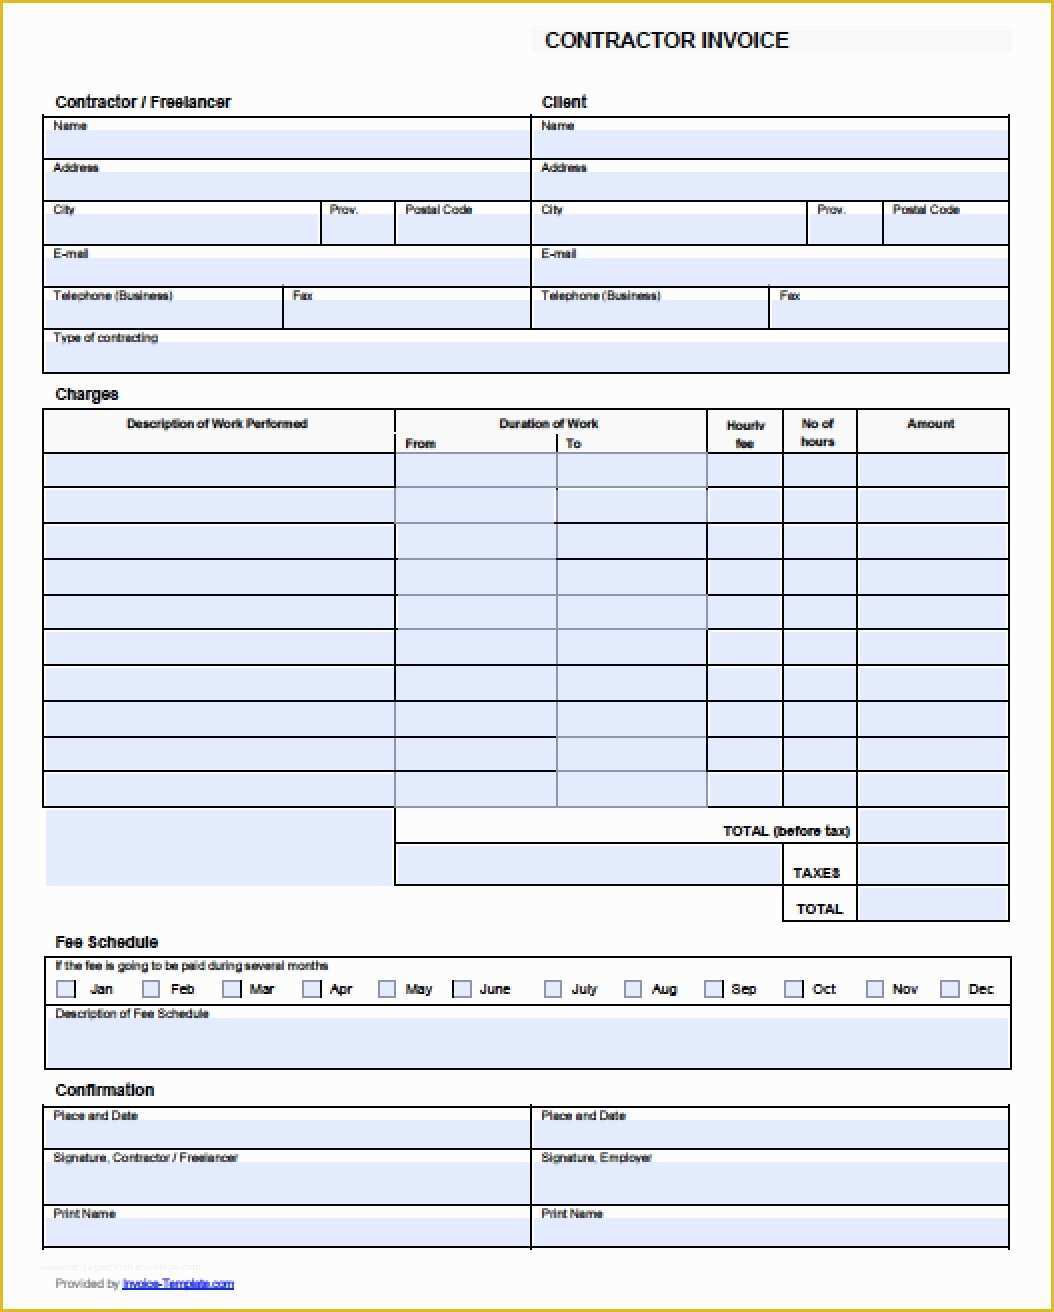 Independent Contractor Invoice Template Free Of Free Contractor Invoice Template Excel Pdf